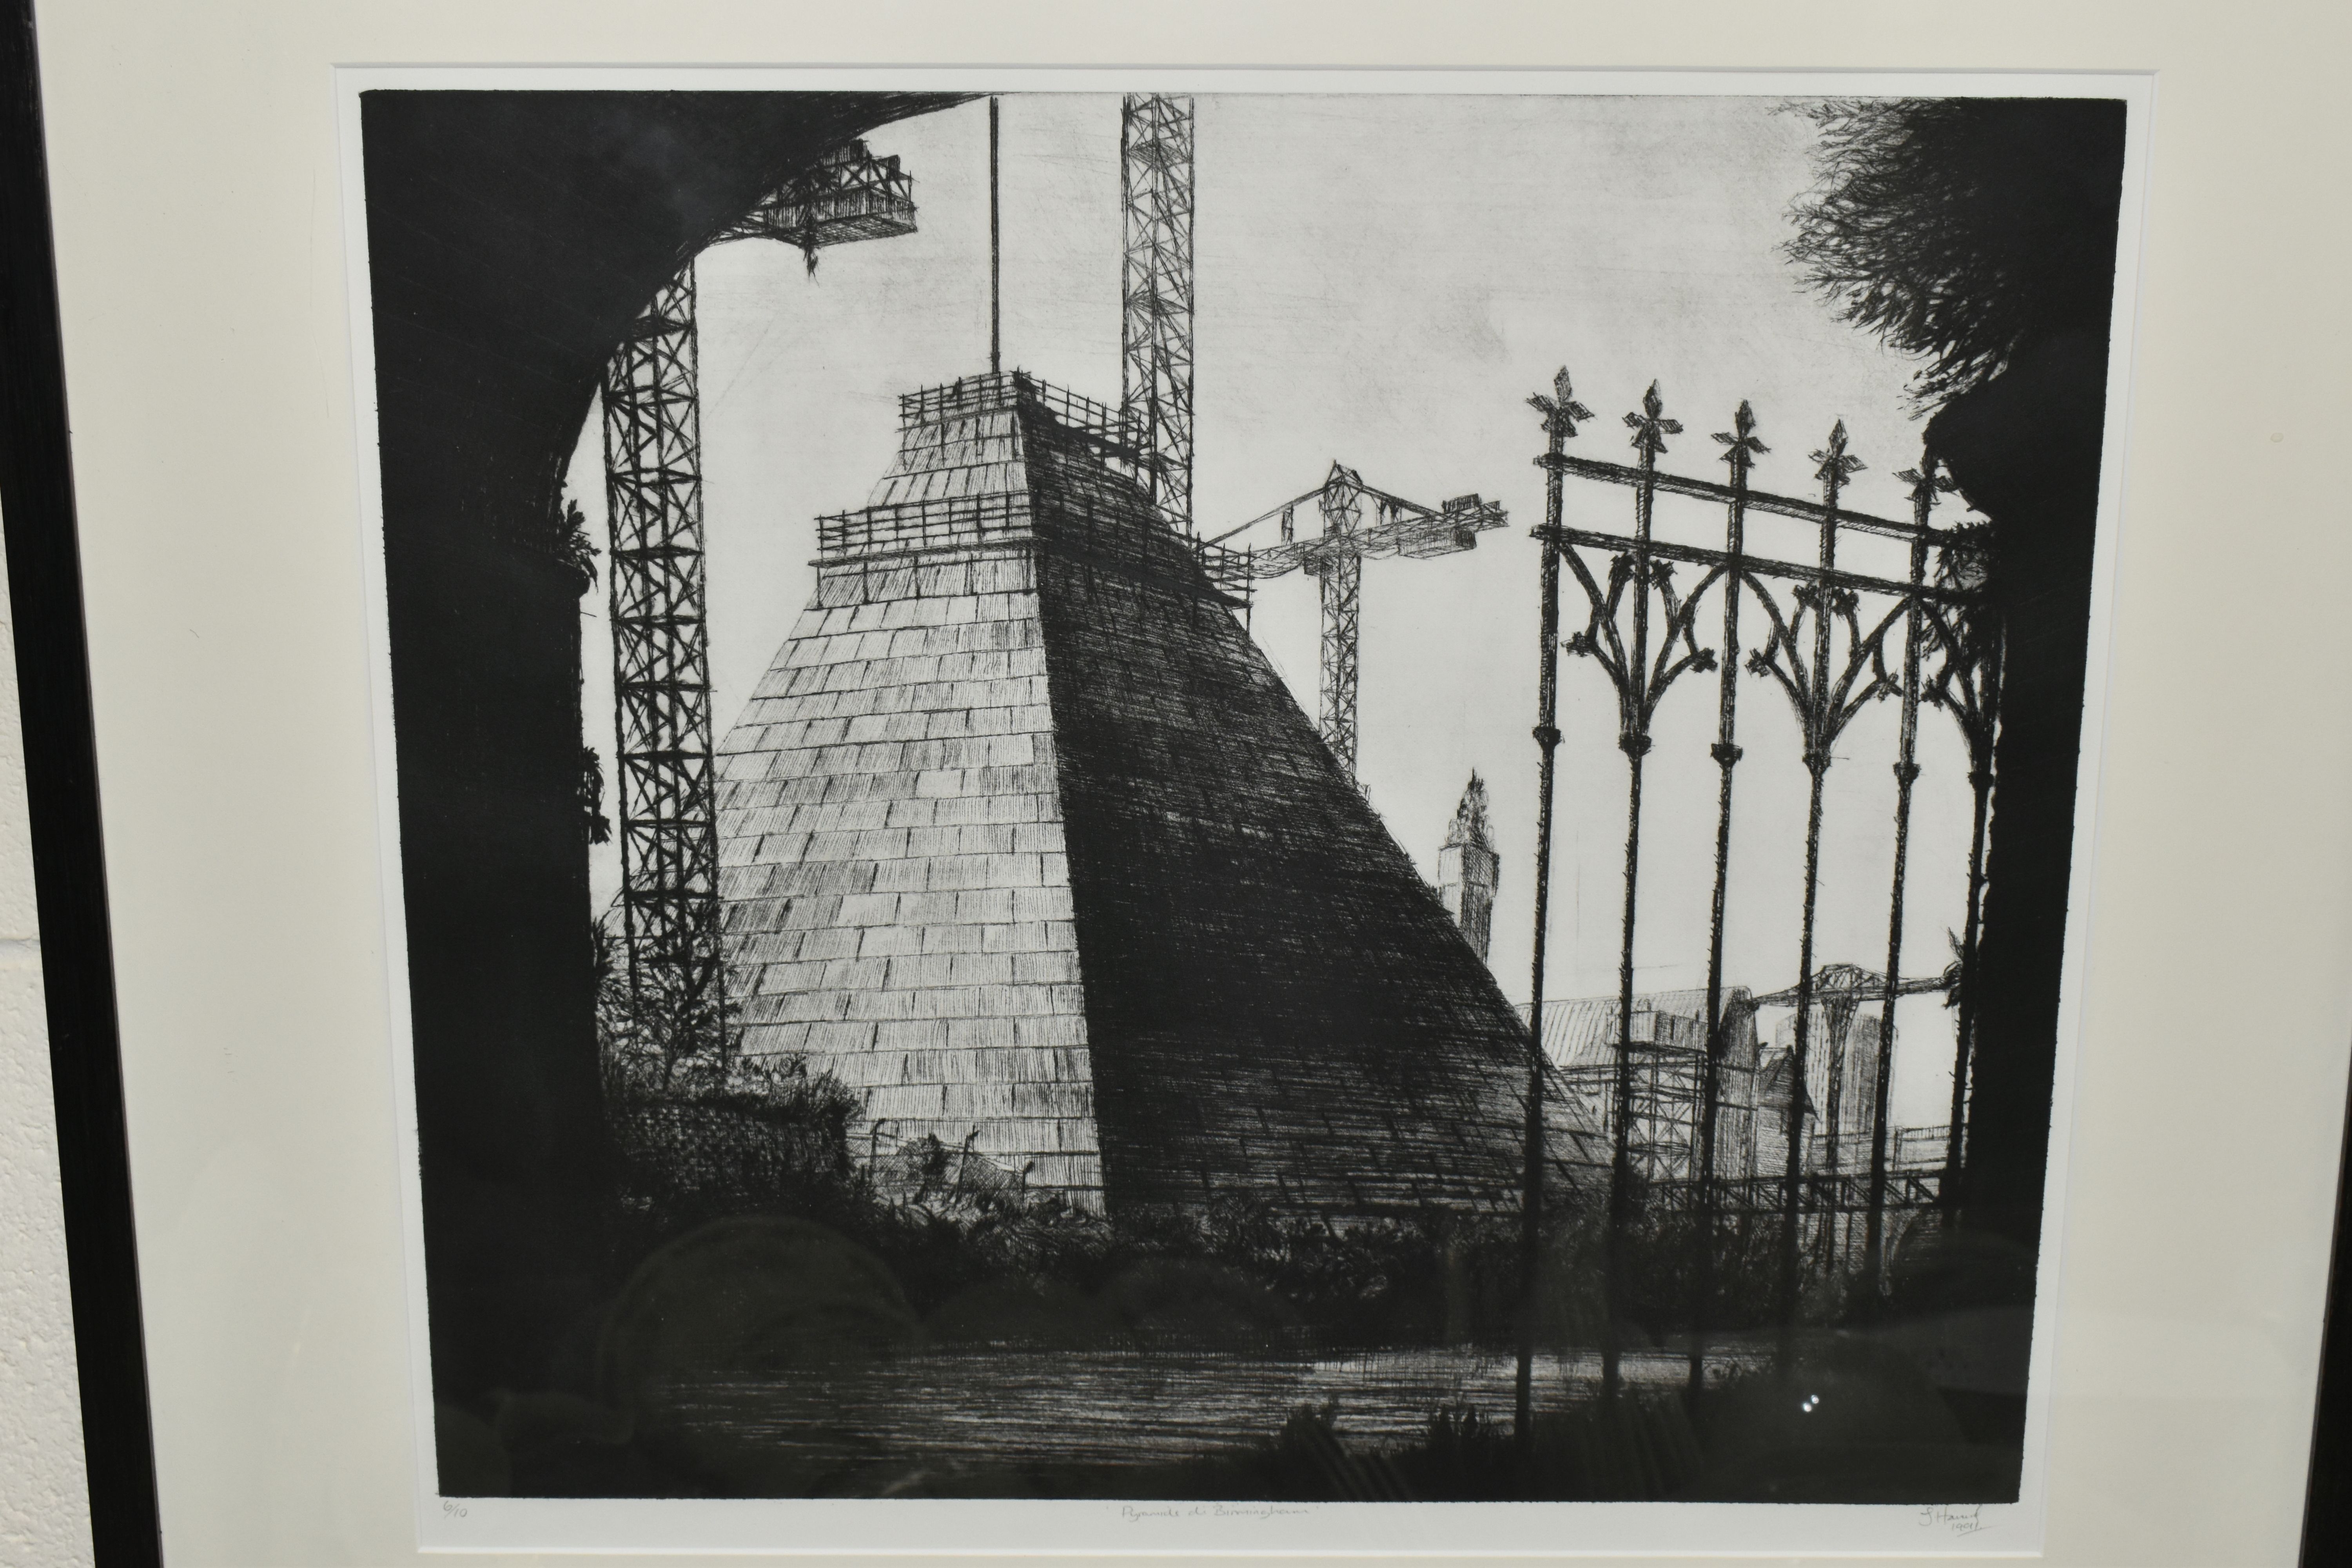 JOHN HOWARD (BRITISH 1958) 'PYRAMIDE DI BIRMINGHAM', a limited edition dry point etching depicting - Image 2 of 6